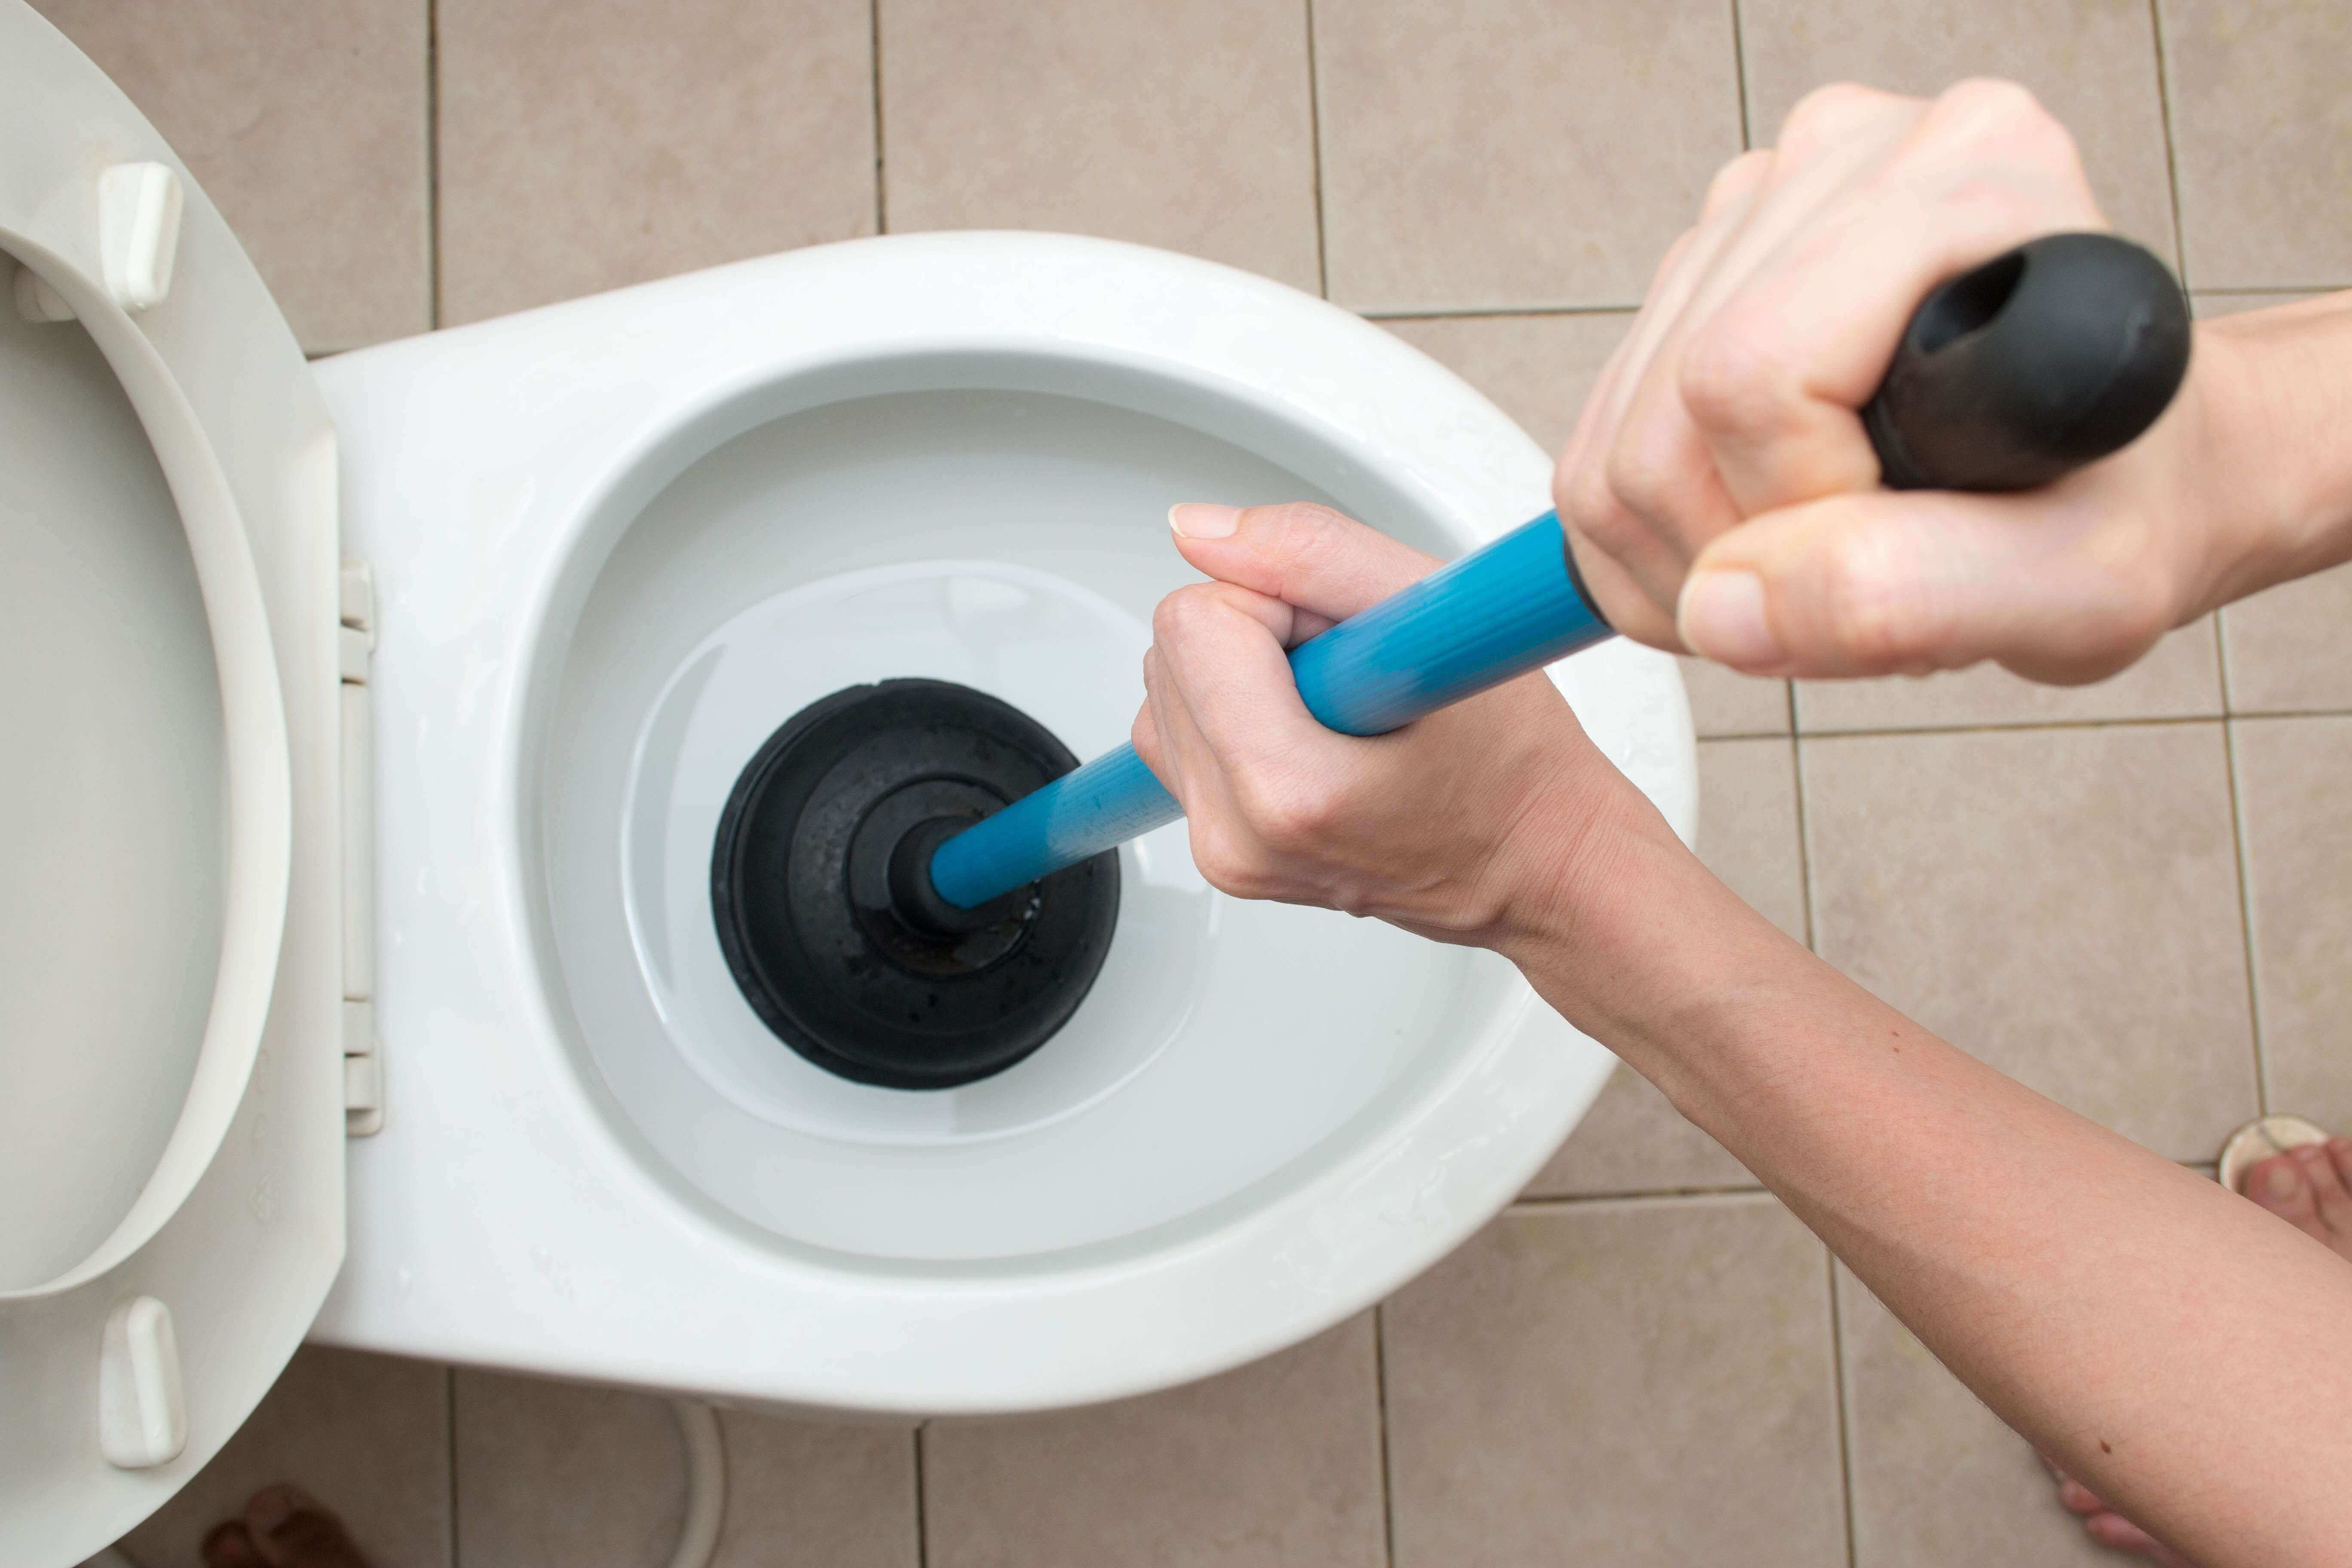 Baby Wipes & 7 Other Things You Should Never Flush Down The Toilet